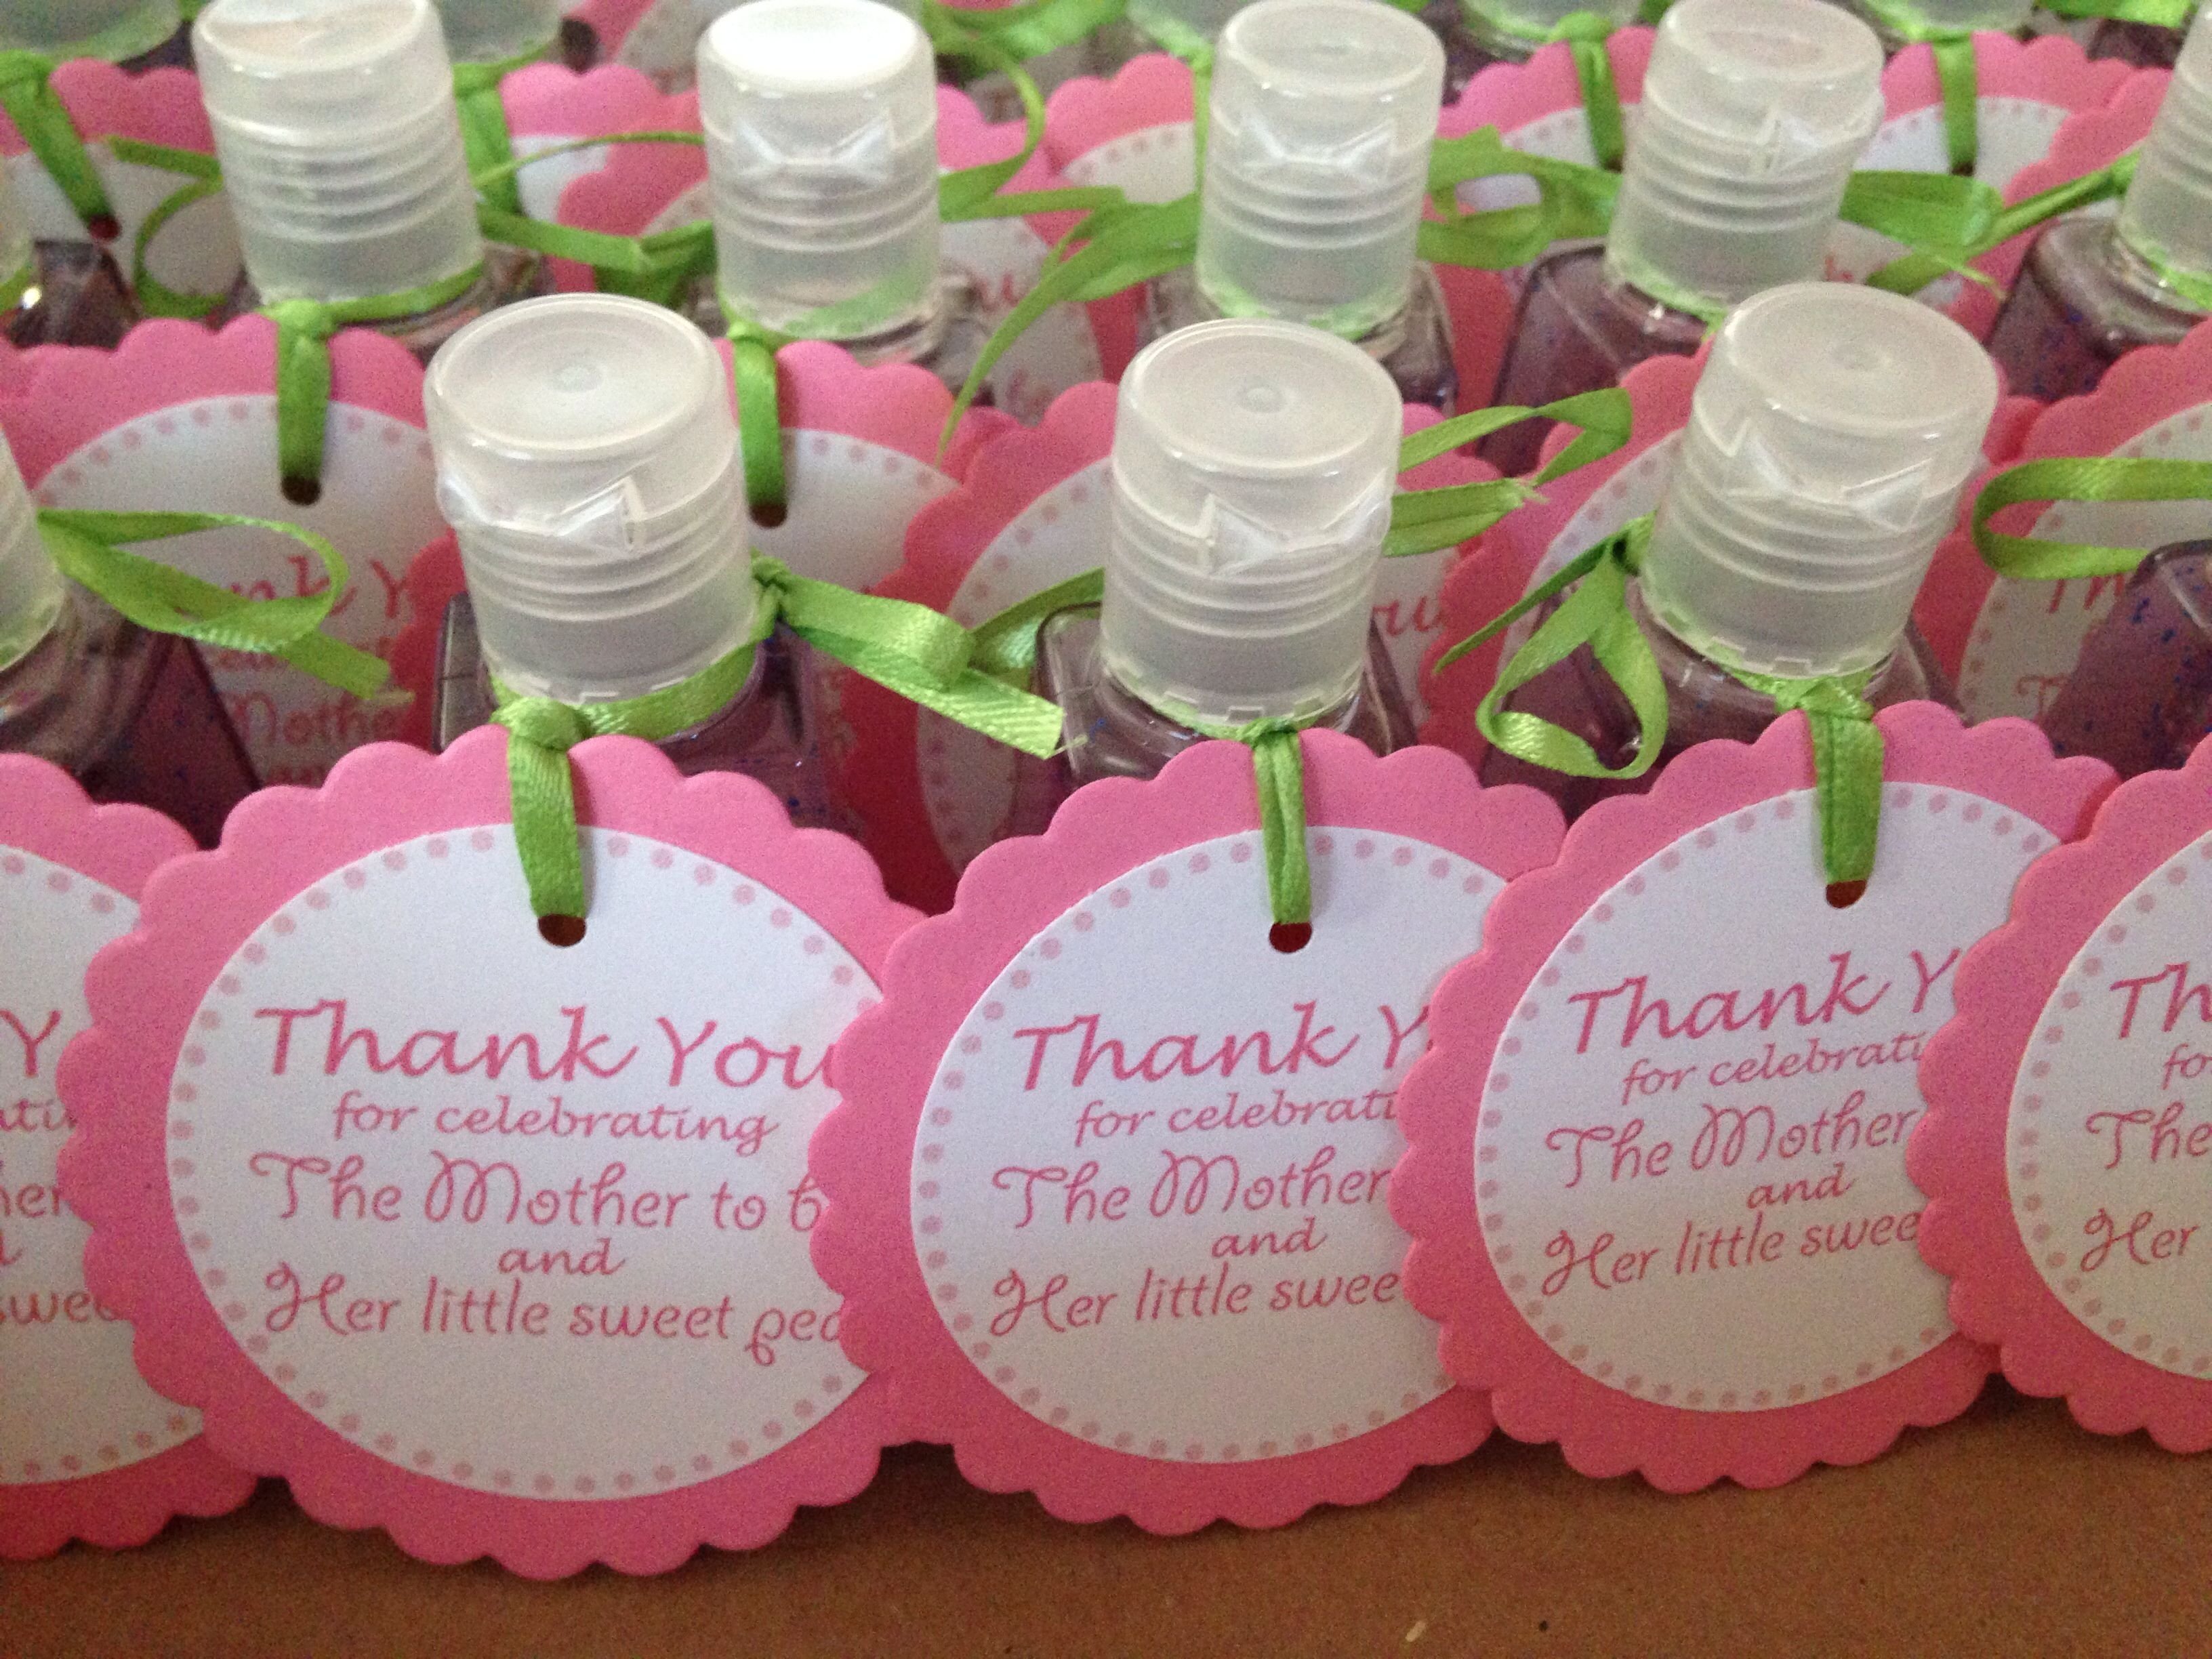 10 Most Recommended Baby Girl Shower Favor Ideas baby girl shower favors sweet pea sanitizers from bathbody works 2022